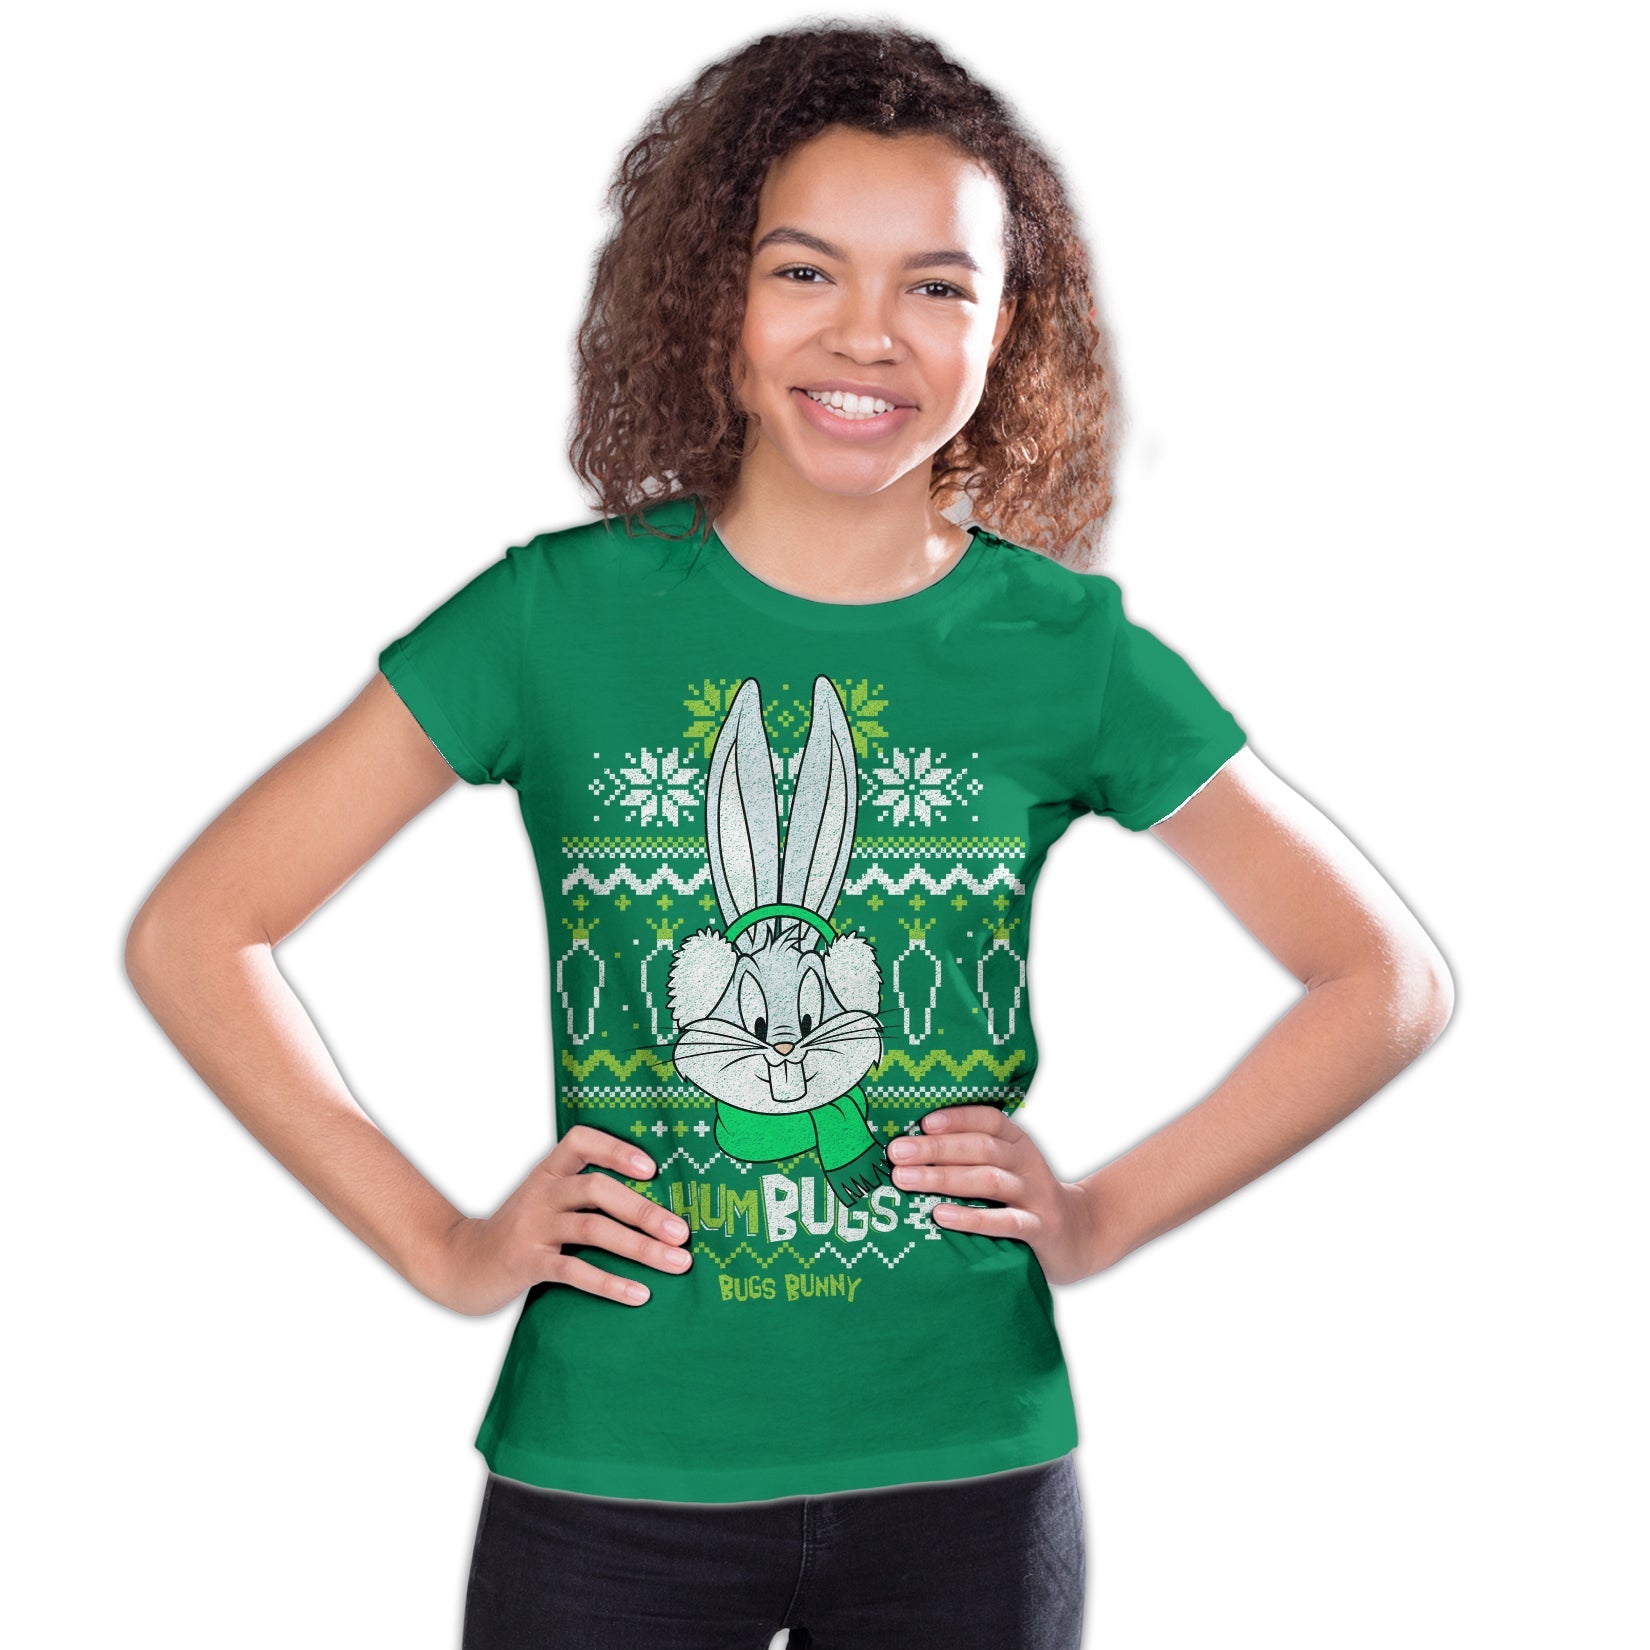 Looney Tunes Bugs Bunny Xmas HumBugs Official Youth T-Shirt